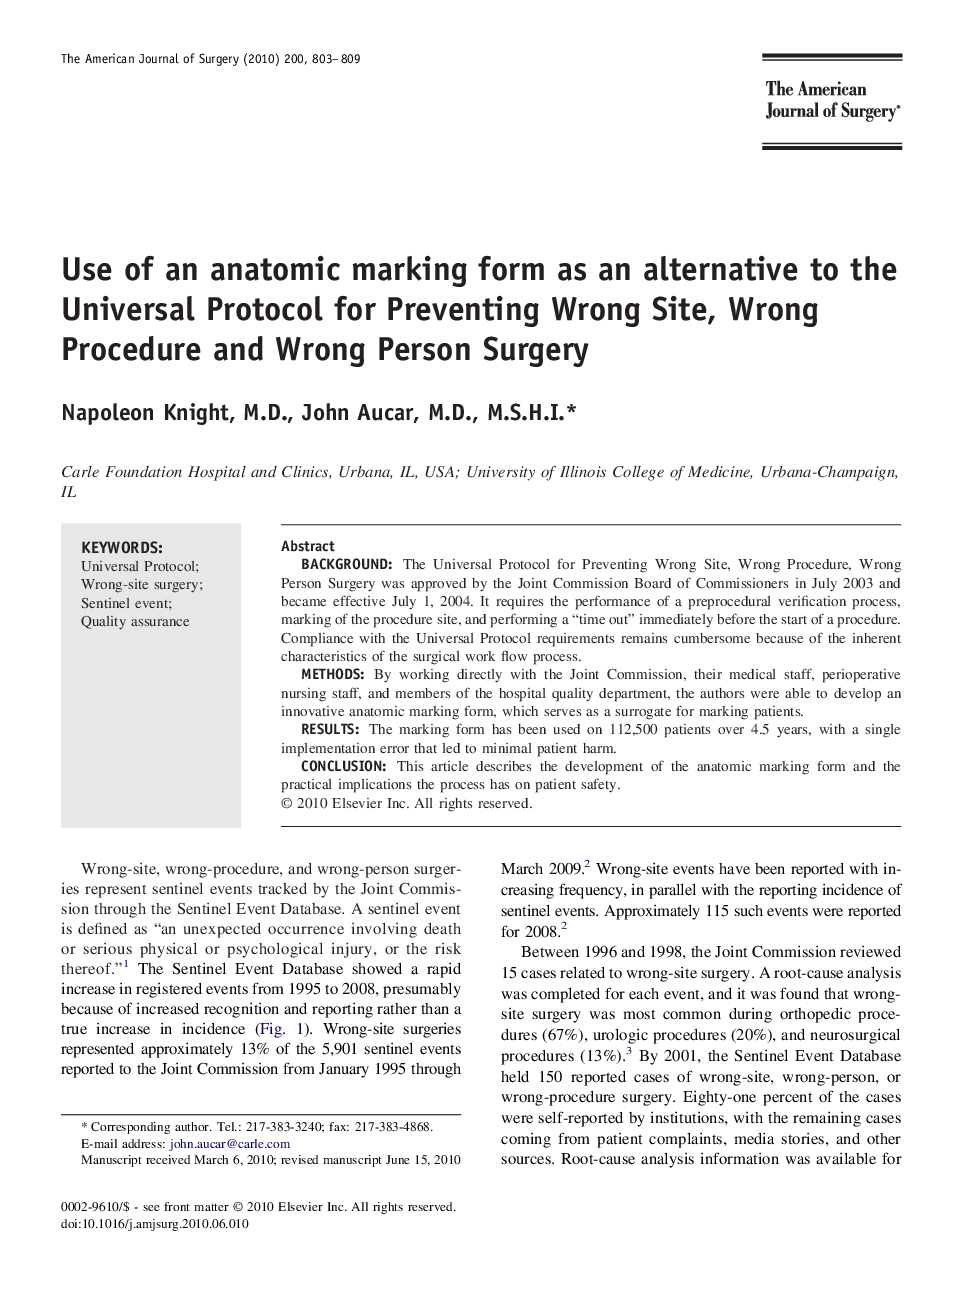 Use of an anatomic marking form as an alternative to the Universal Protocol for Preventing Wrong Site, Wrong Procedure and Wrong Person Surgery